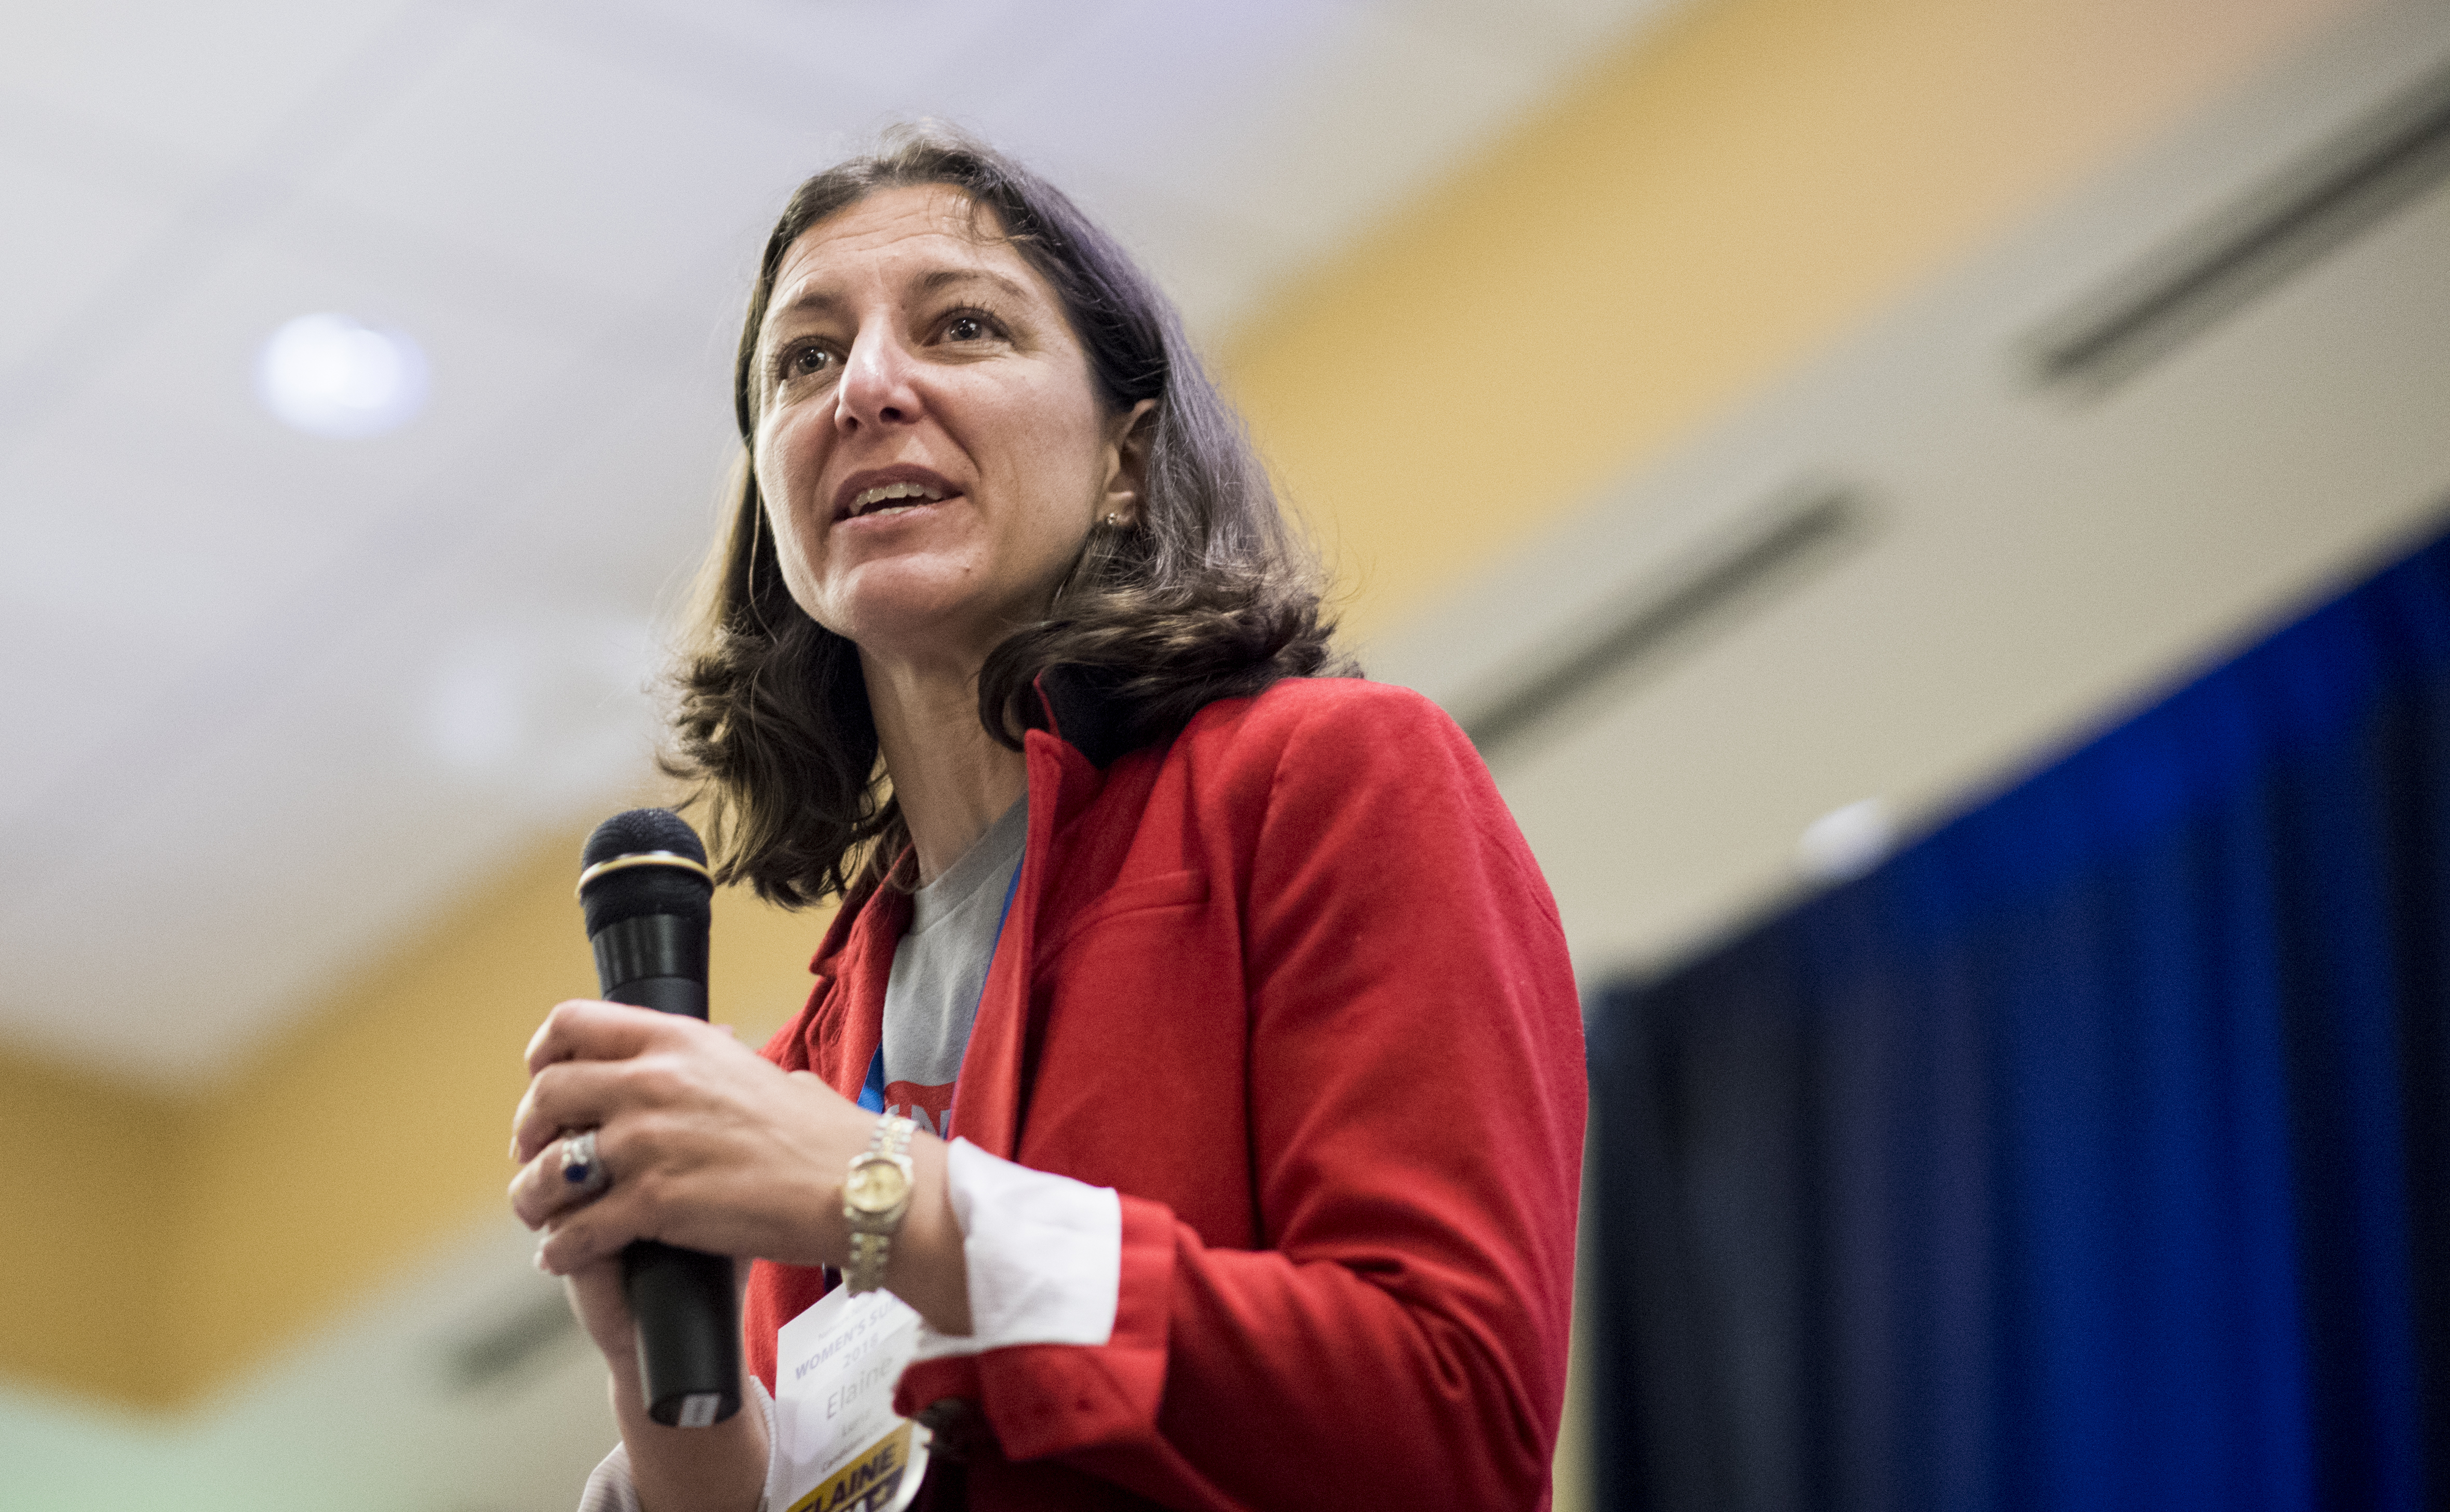 Elaine Luria, Democratic candidate for the 2nd congressional district of Virginia, speaks during the Women's Summit in Herndon, Va., on Saturday June 23, 2018. (Bill Clark—CQ-Roll Call)